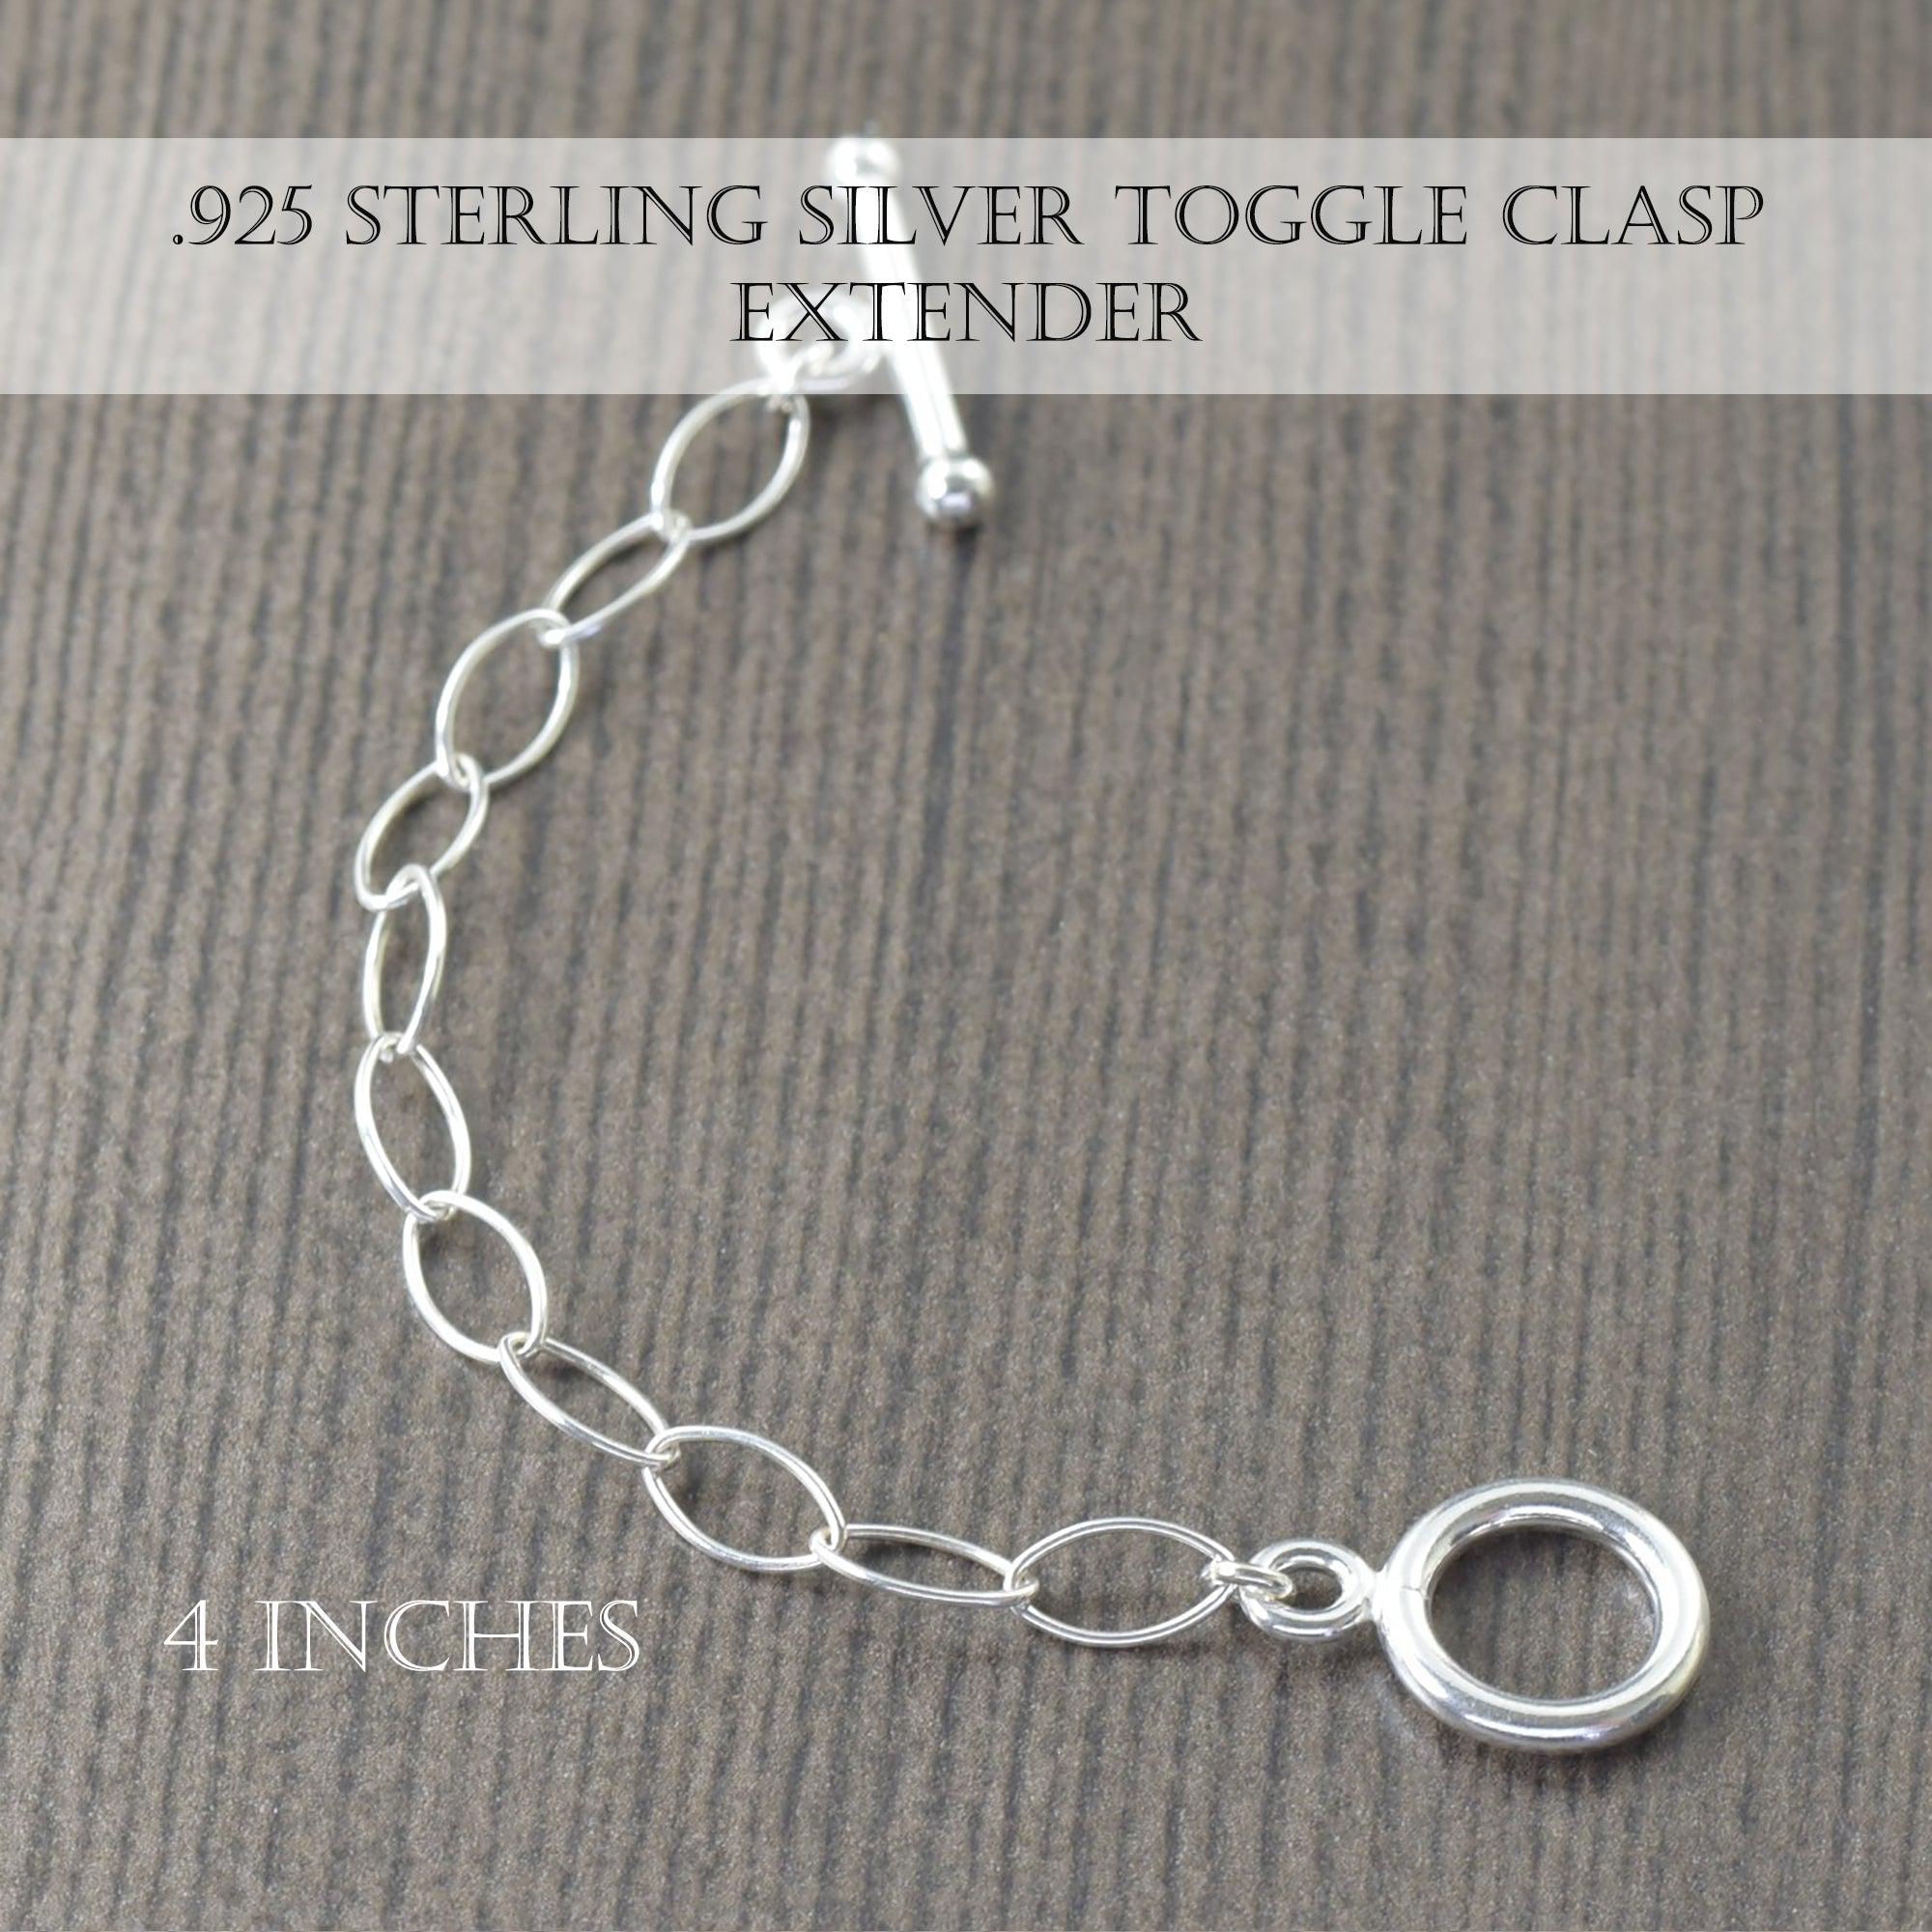 Sterling silver necklace extensions for toggle clasp, in 2-5 inches